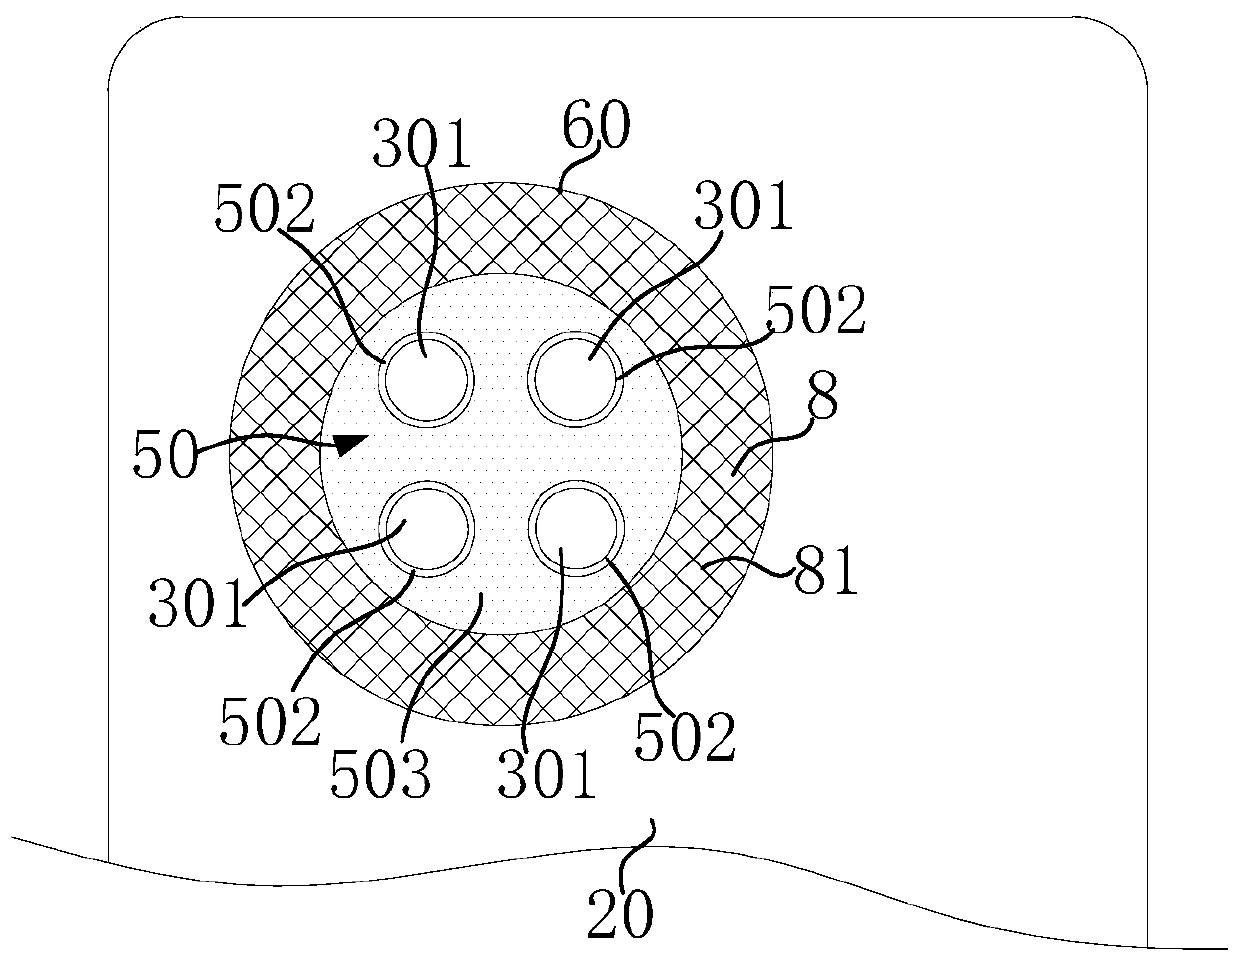 Decorative plate and electronic device